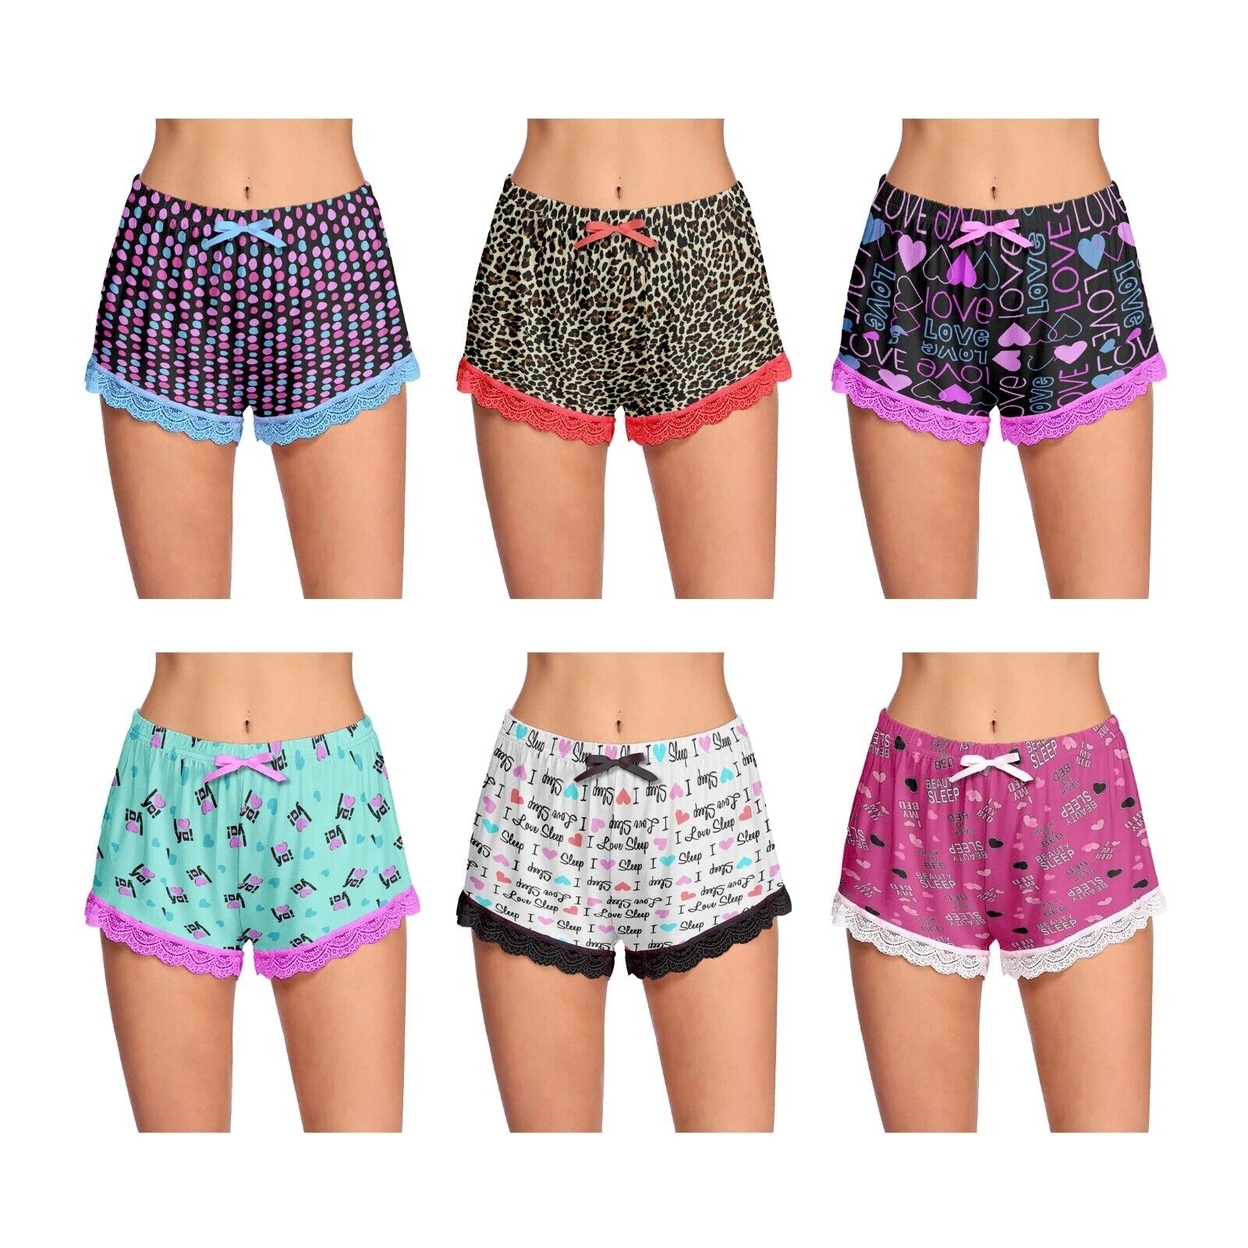 Multi-Pack: Women's Ultra-Soft Cozy Fun Printed Lace Trim Pajama Lounge Shorts - 1-pack, Small, Love